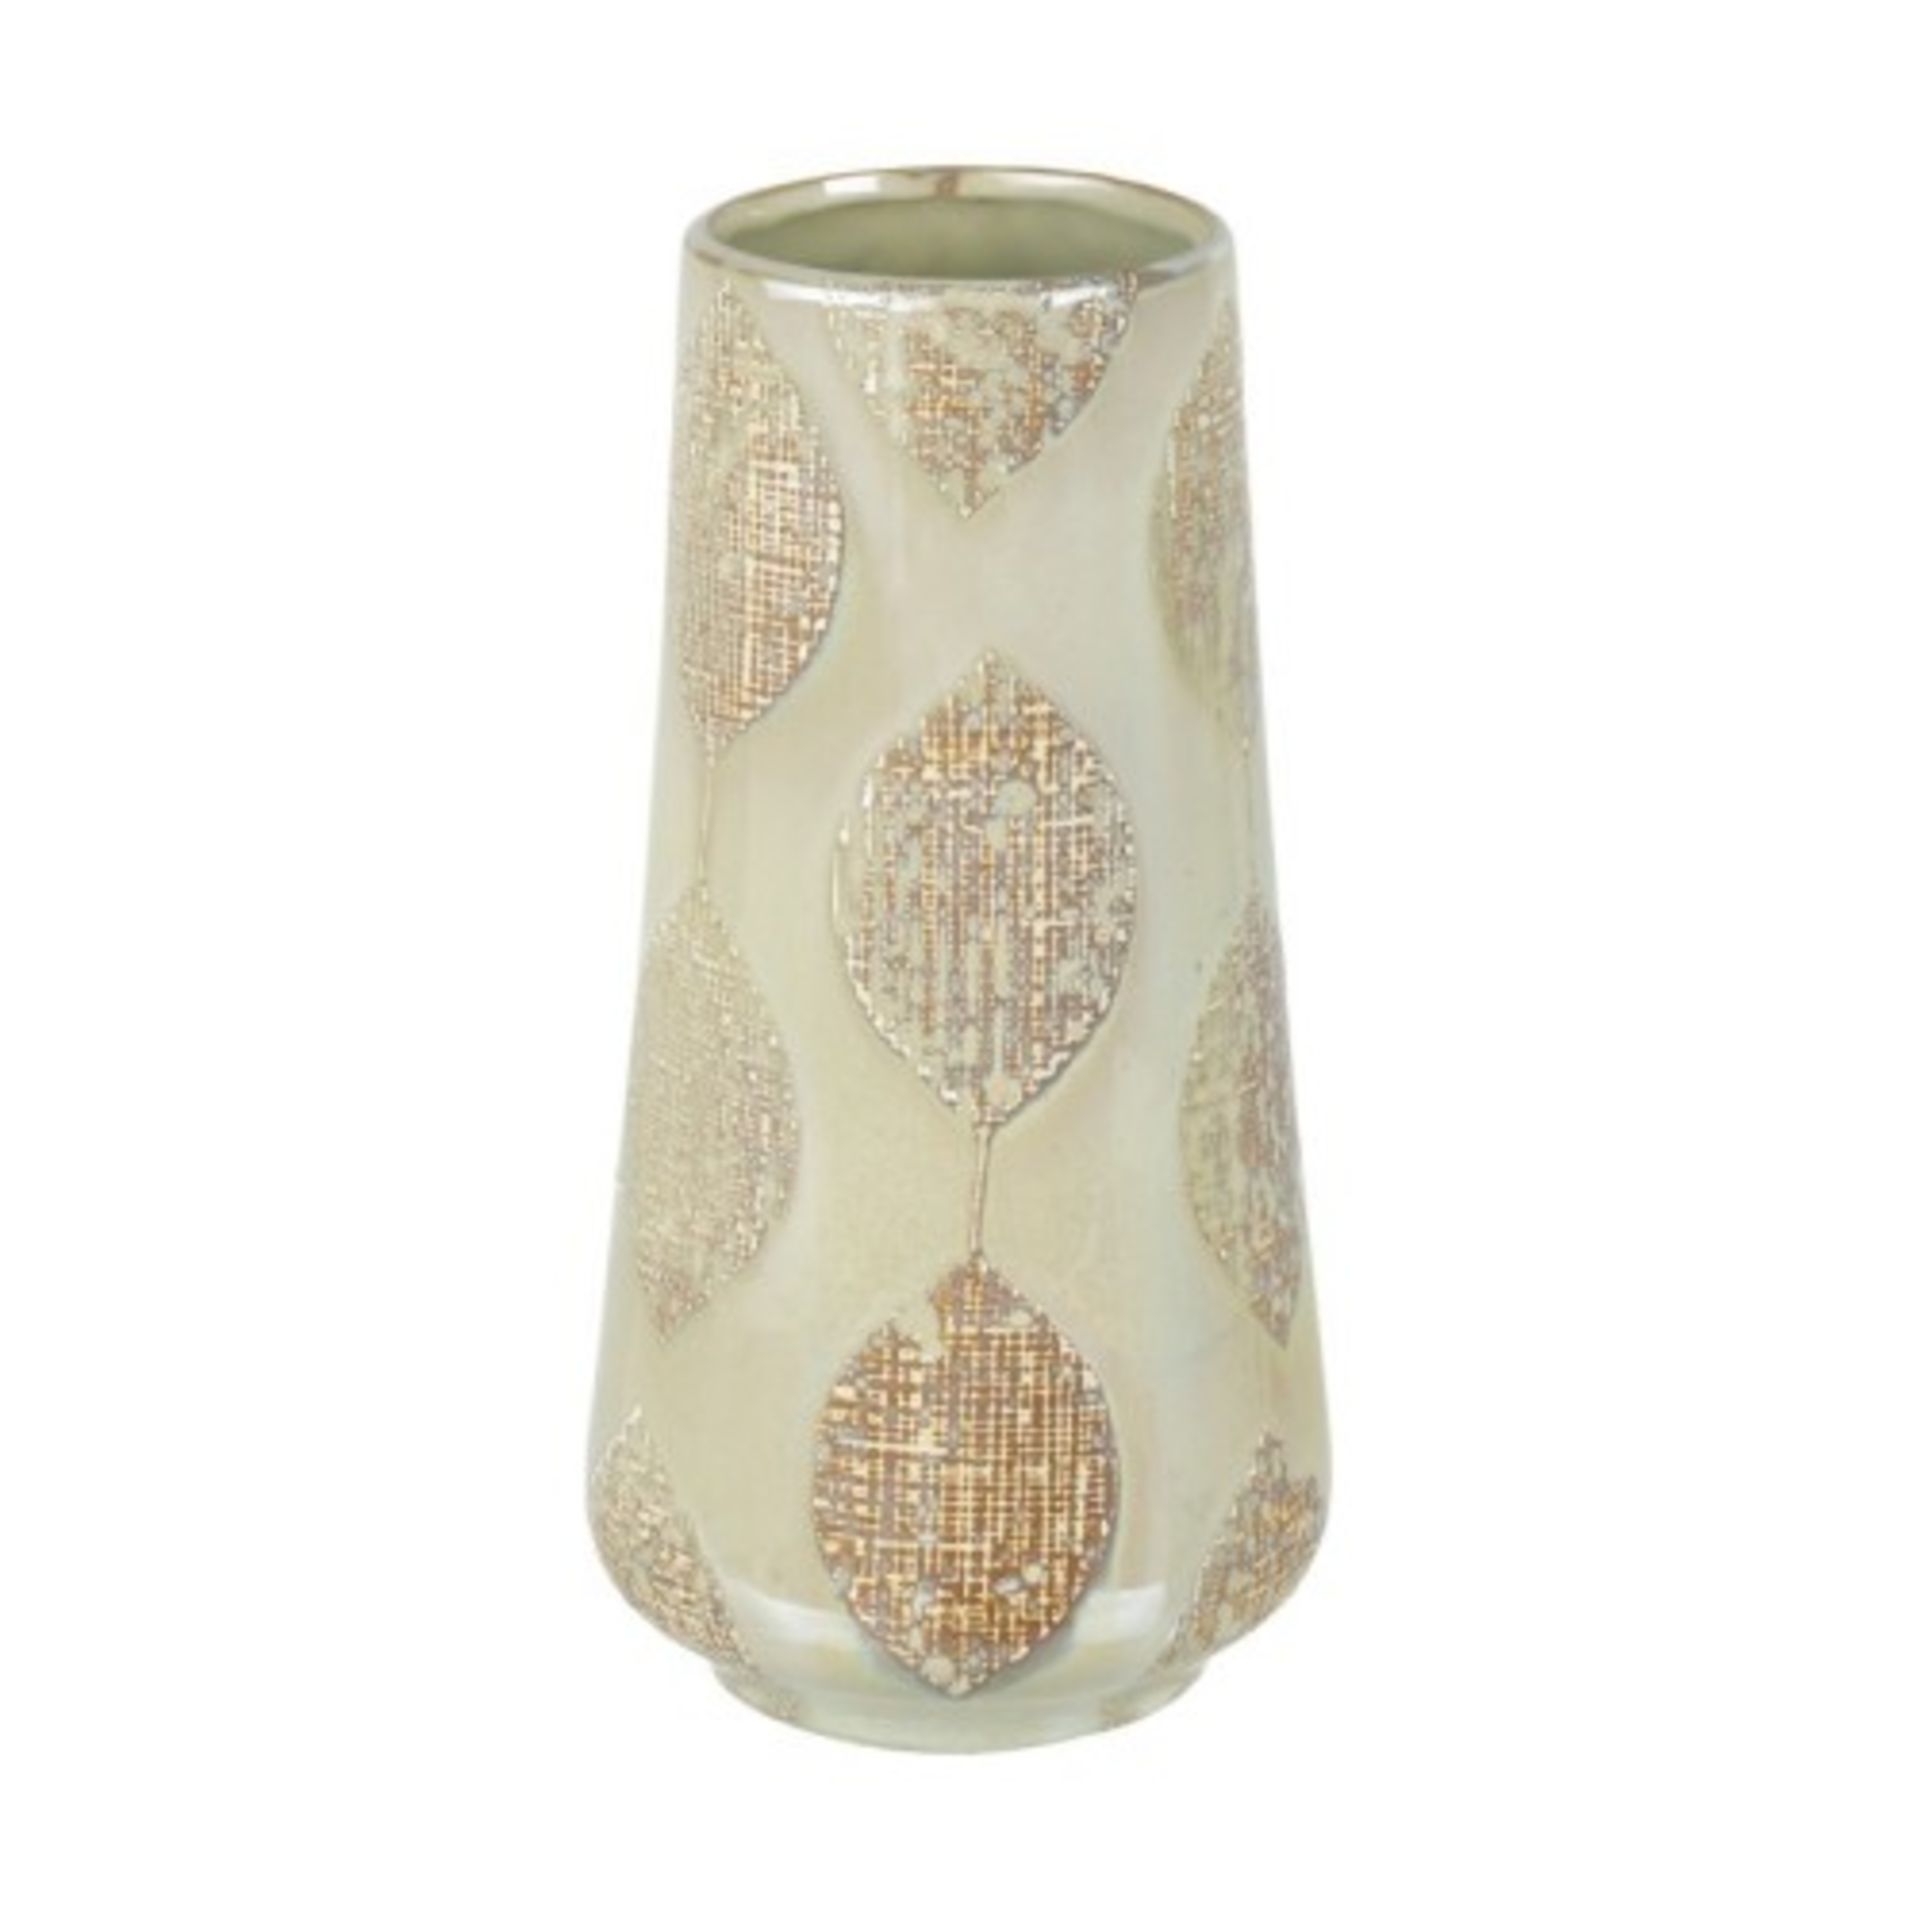 Lustre Ceramic Leafy Vase Cream 165x485mmh Brand New Parlane Accessories We take our product